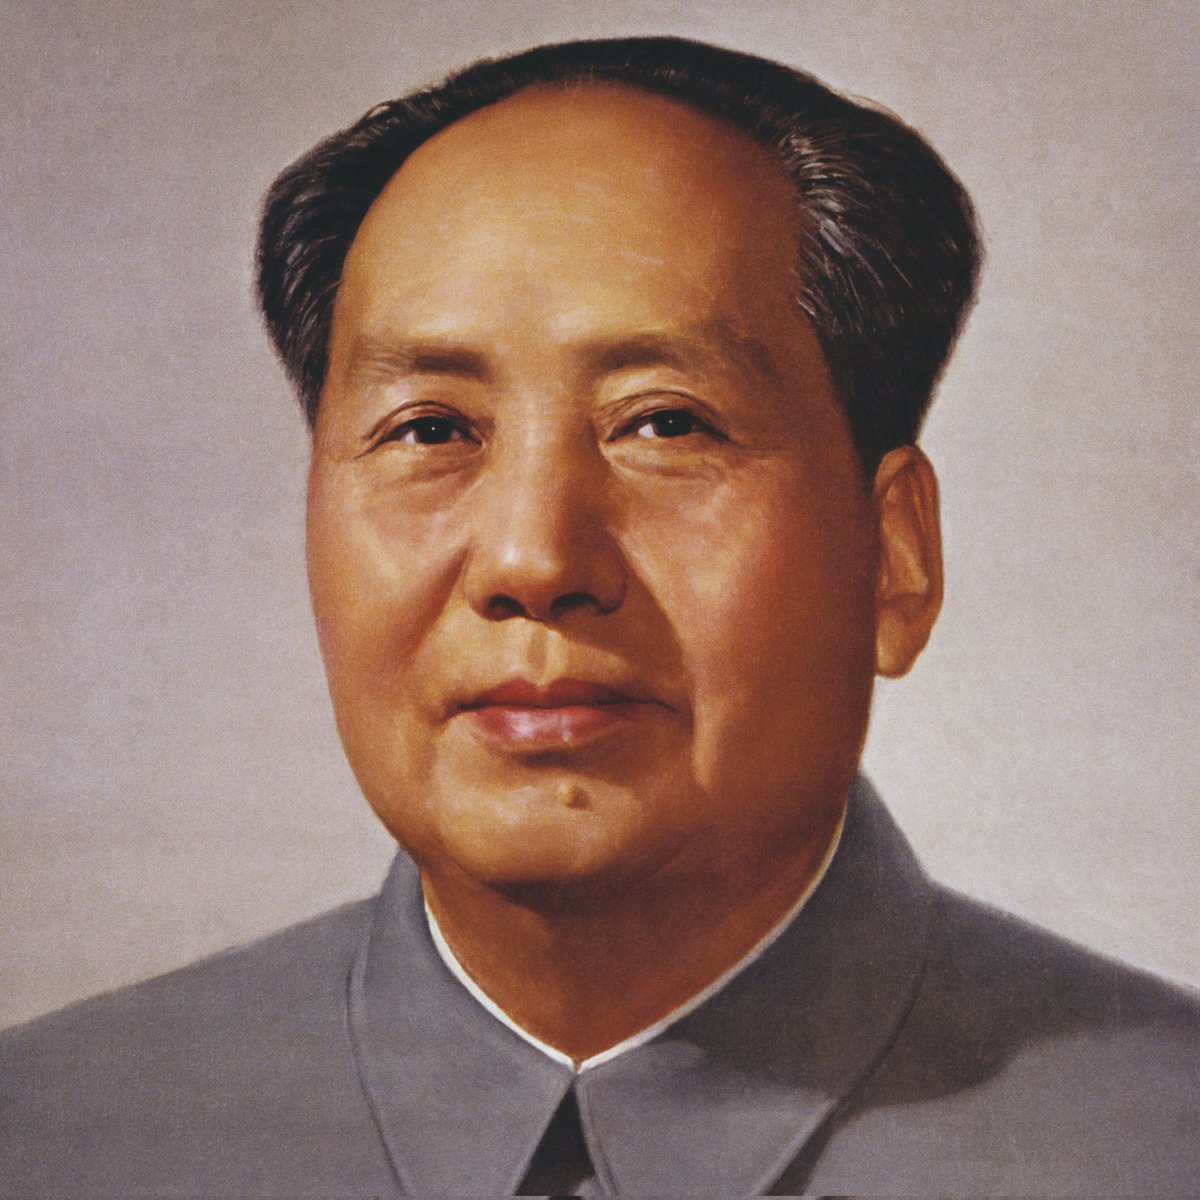 Chinese communist revolutionary #MaoZedong died from a heart attack #onthisday in 1976. #ChairmanMao #Maoism #PeoplesRepublicofChina #China #OnProtractedWar #communism #GreatLeapForward #history #trivia